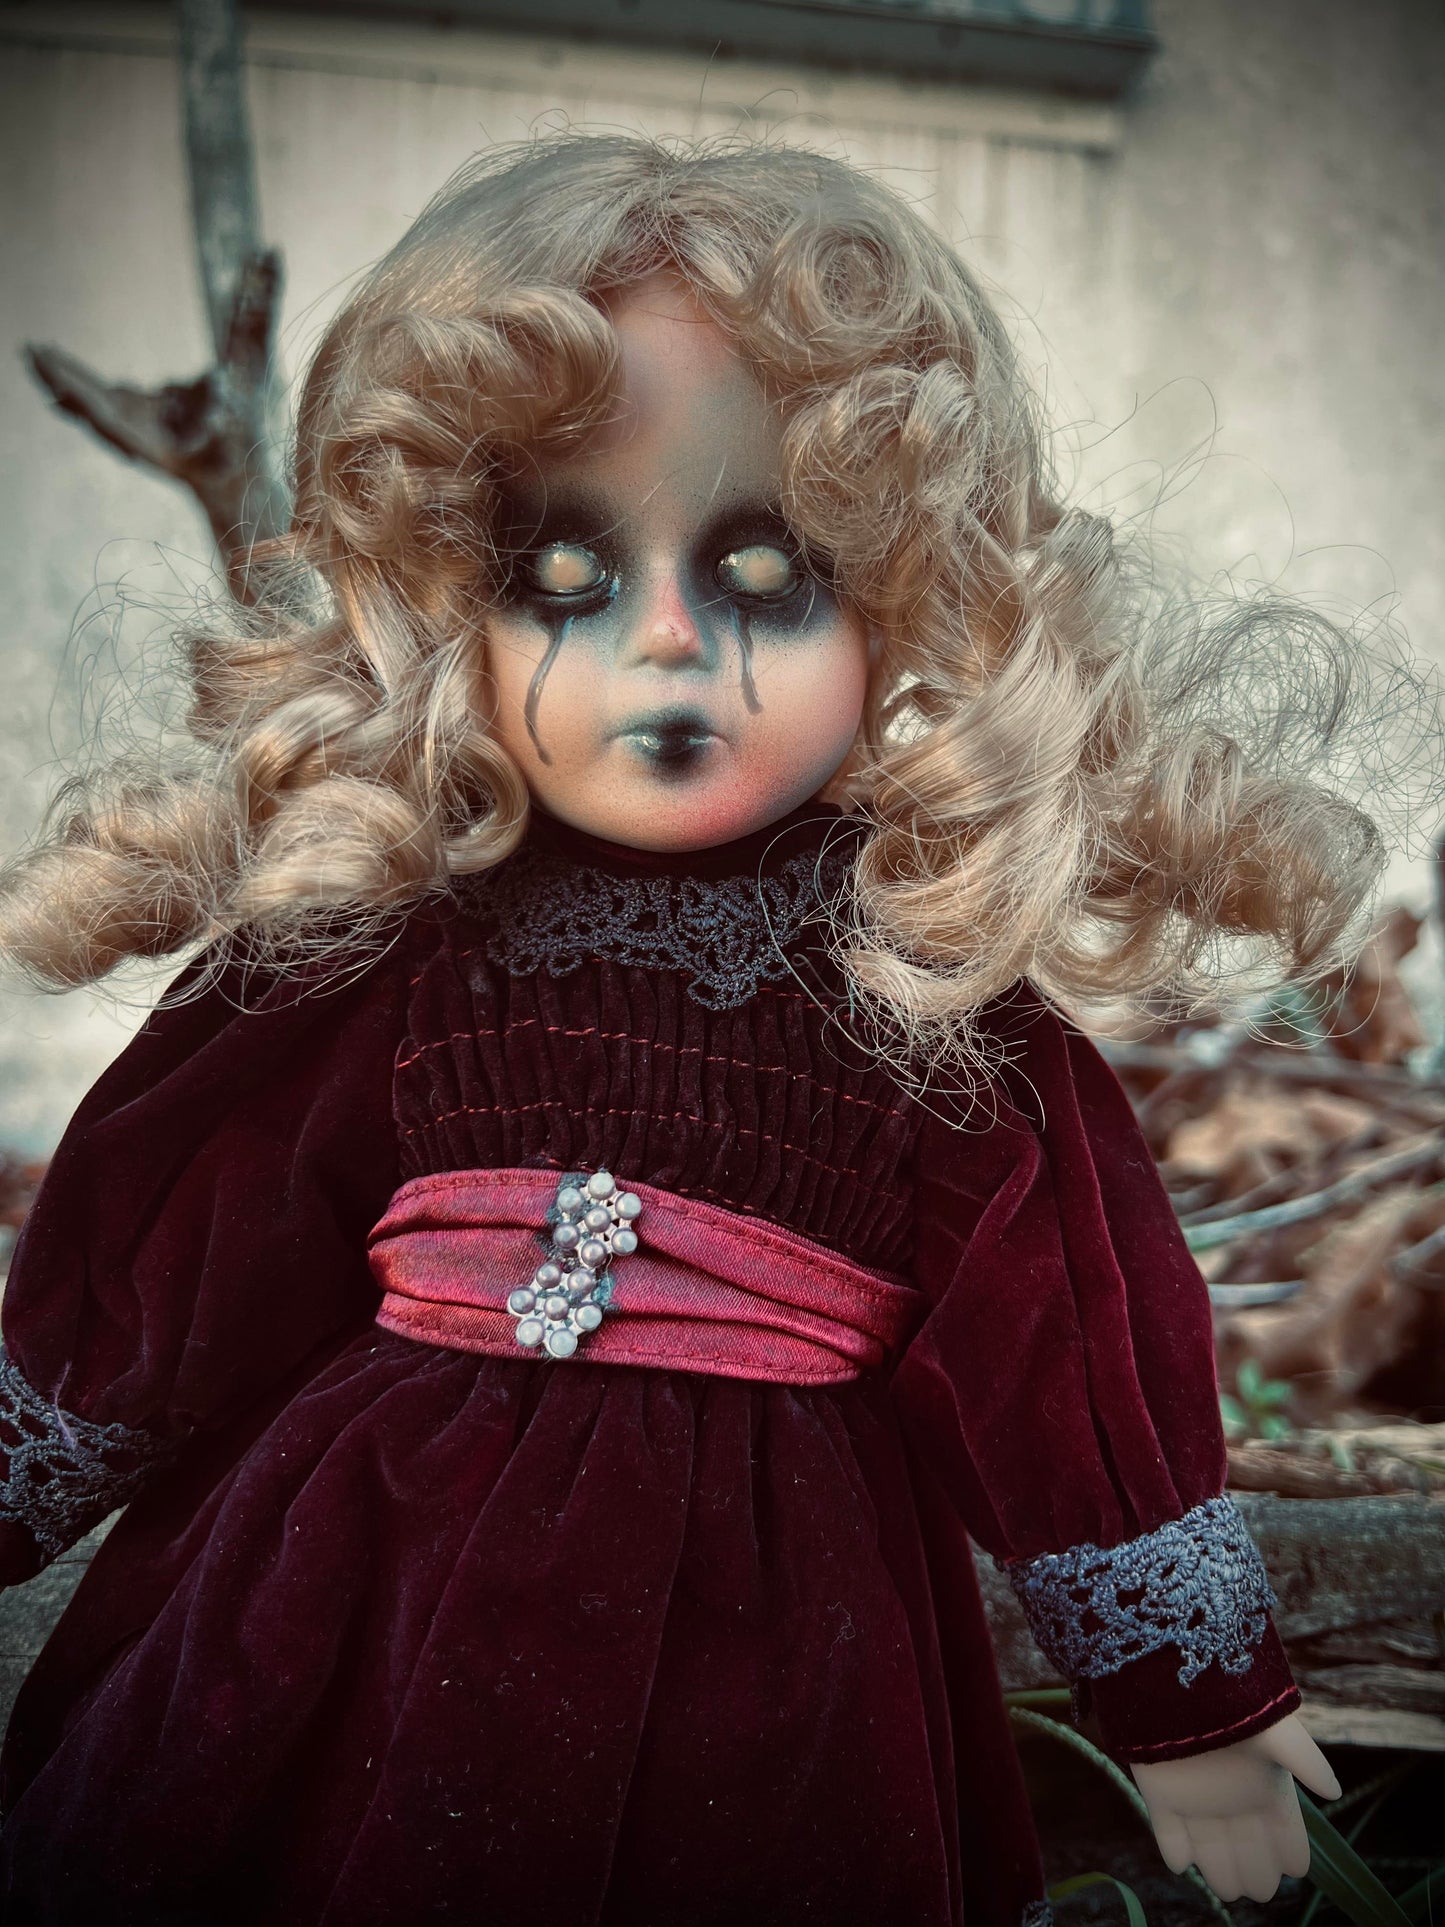 Meet Lynette 14" Doll Porcelain Witchy Creepy Haunted Spirit Infected Scary Poltergeist Spooky Zombie Possessed Fall Gothic Positive Energy